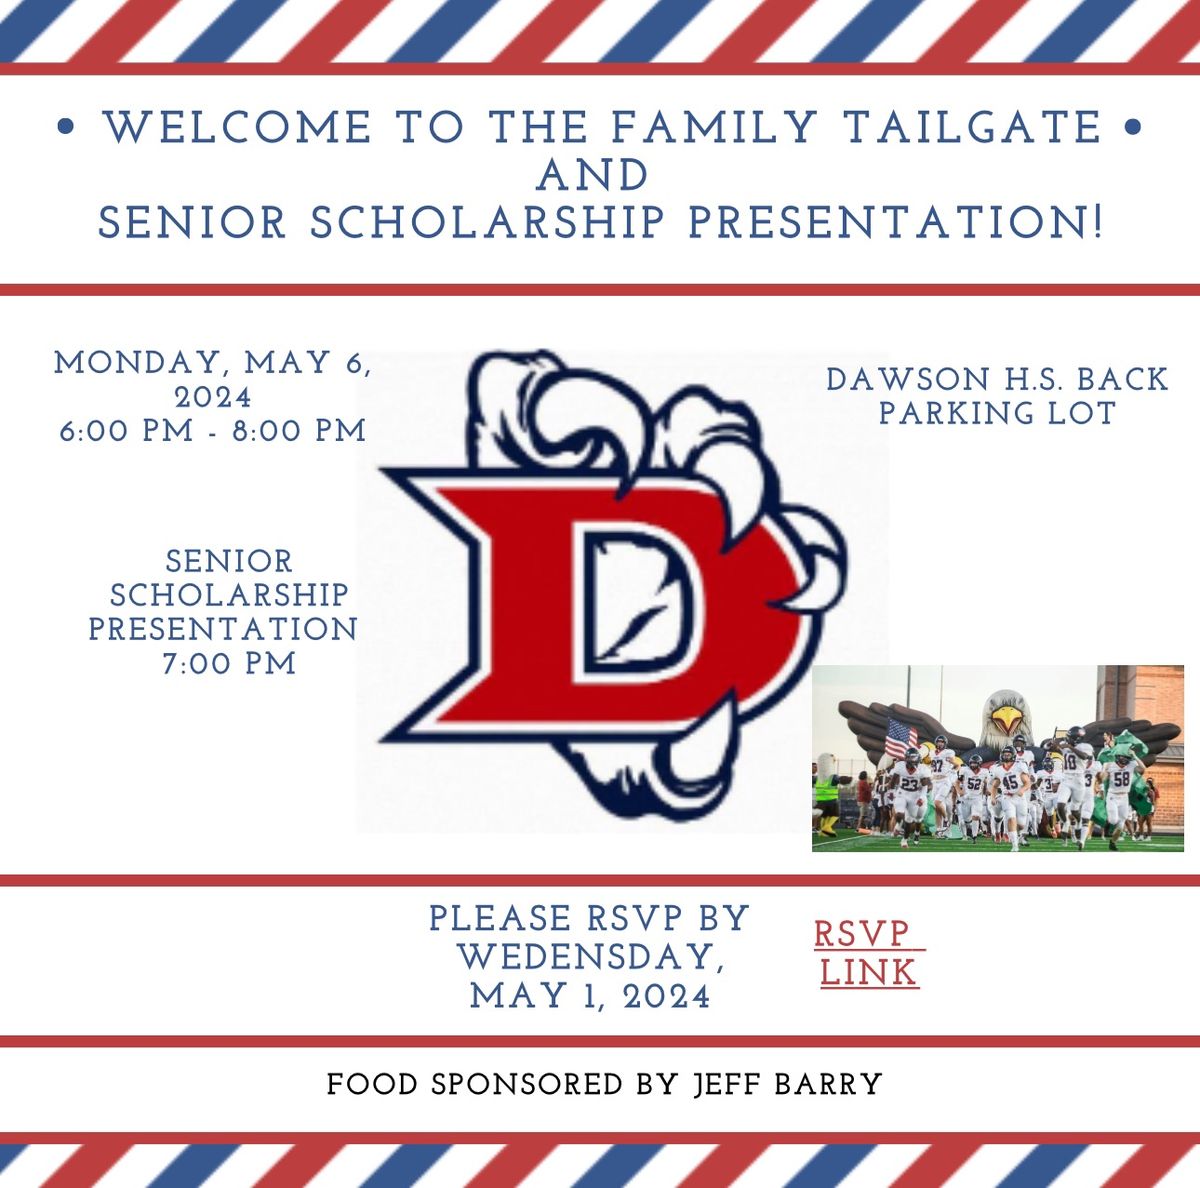 Welcome to the Family Tailgate & Senior Scholarship Presentstion